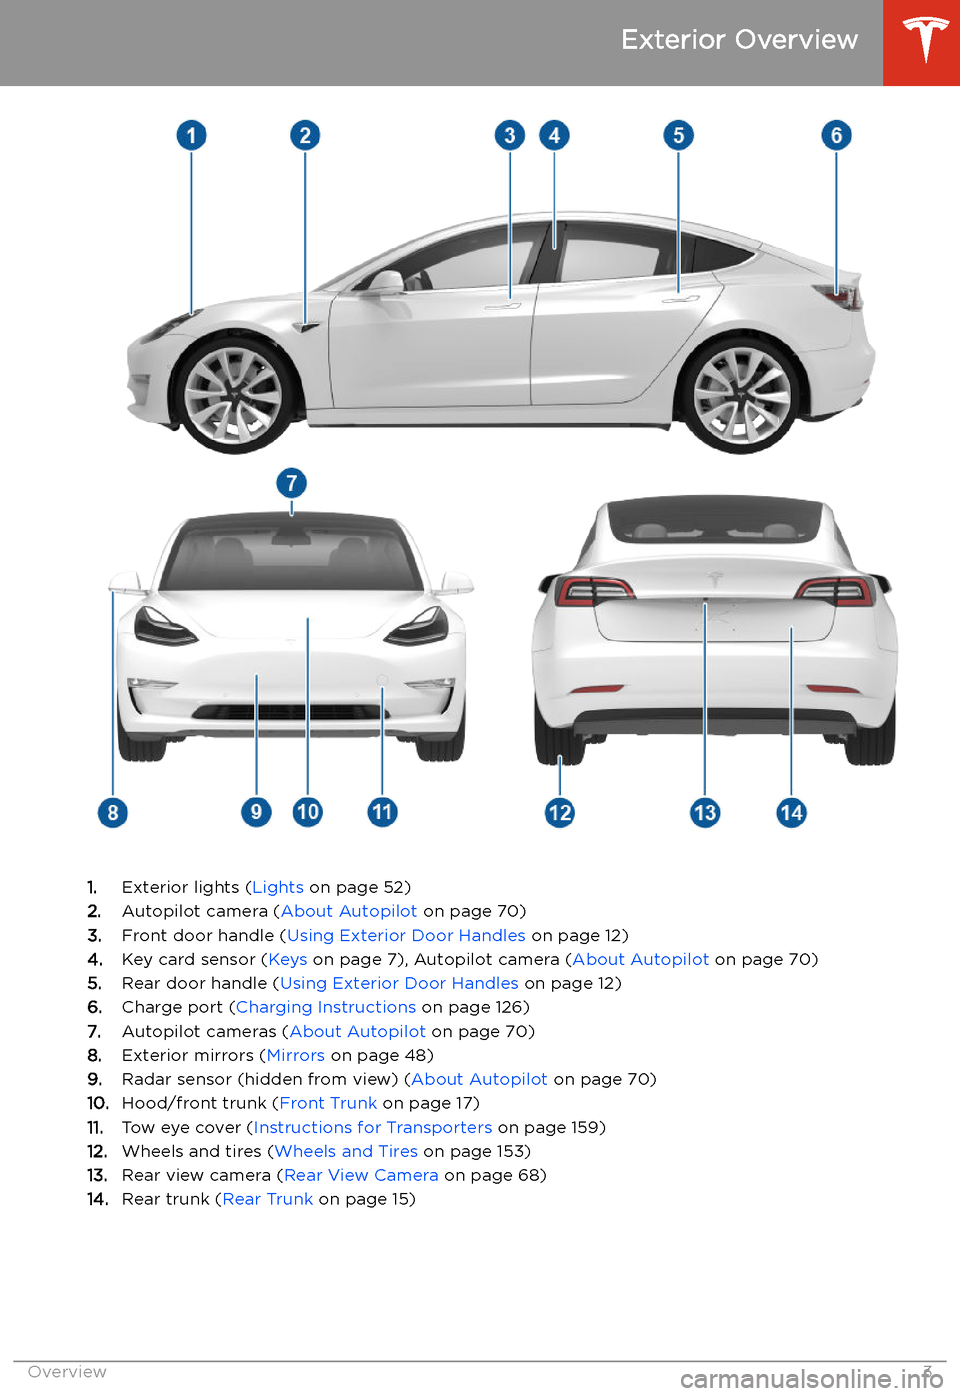 TESLA MODEL 3 2019  Owners Manual (Europe) Exterior Overview
1.Exterior lights ( Lights on page 52)
2. Autopilot camera ( About Autopilot on page 70)
3. Front door handle ( Using Exterior Door Handles  on page 12)
4. Key card sensor ( Keys on 